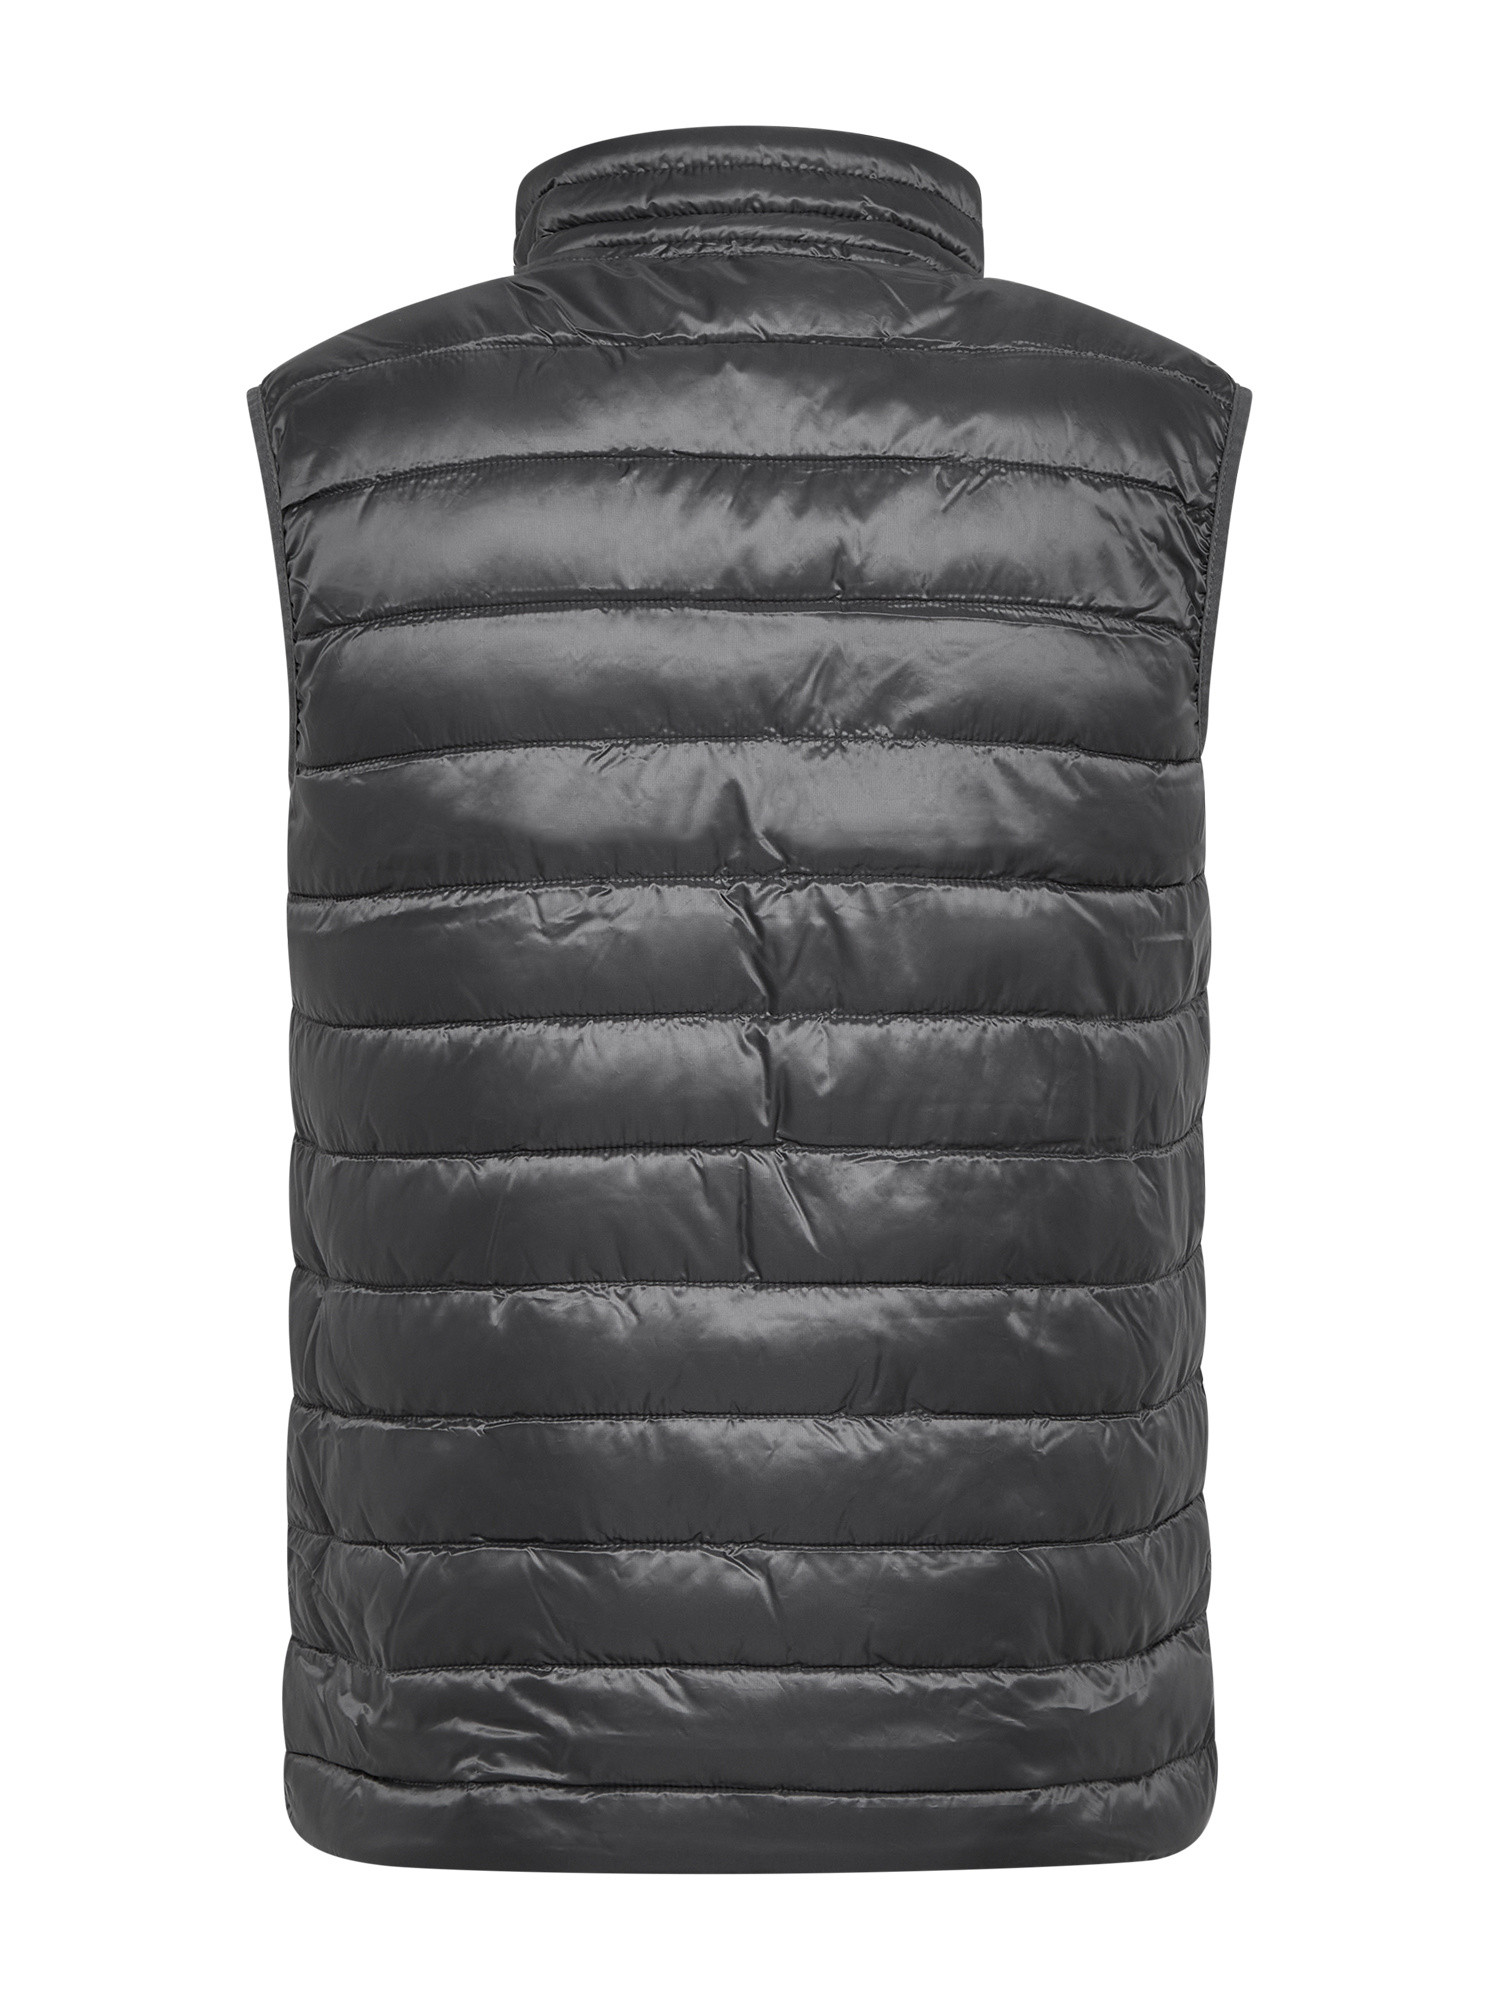 Canadian - Gilet Tylers Bay Recycled, Grigio, large image number 1